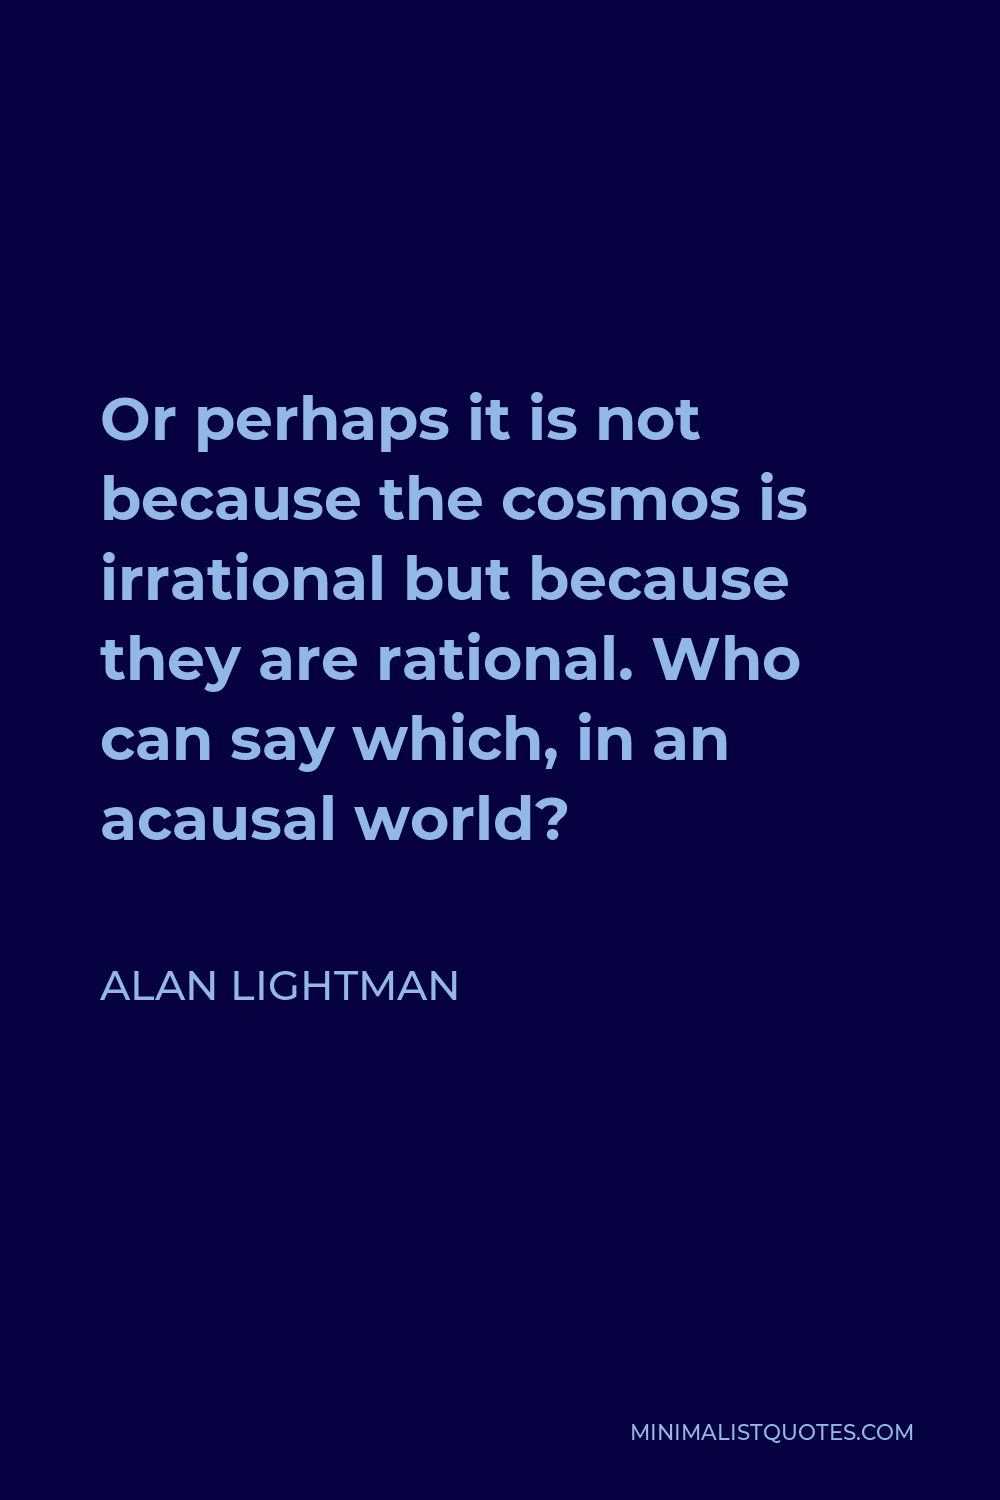 Alan Lightman Quote - Or perhaps it is not because the cosmos is irrational but because they are rational. Who can say which, in an acausal world?